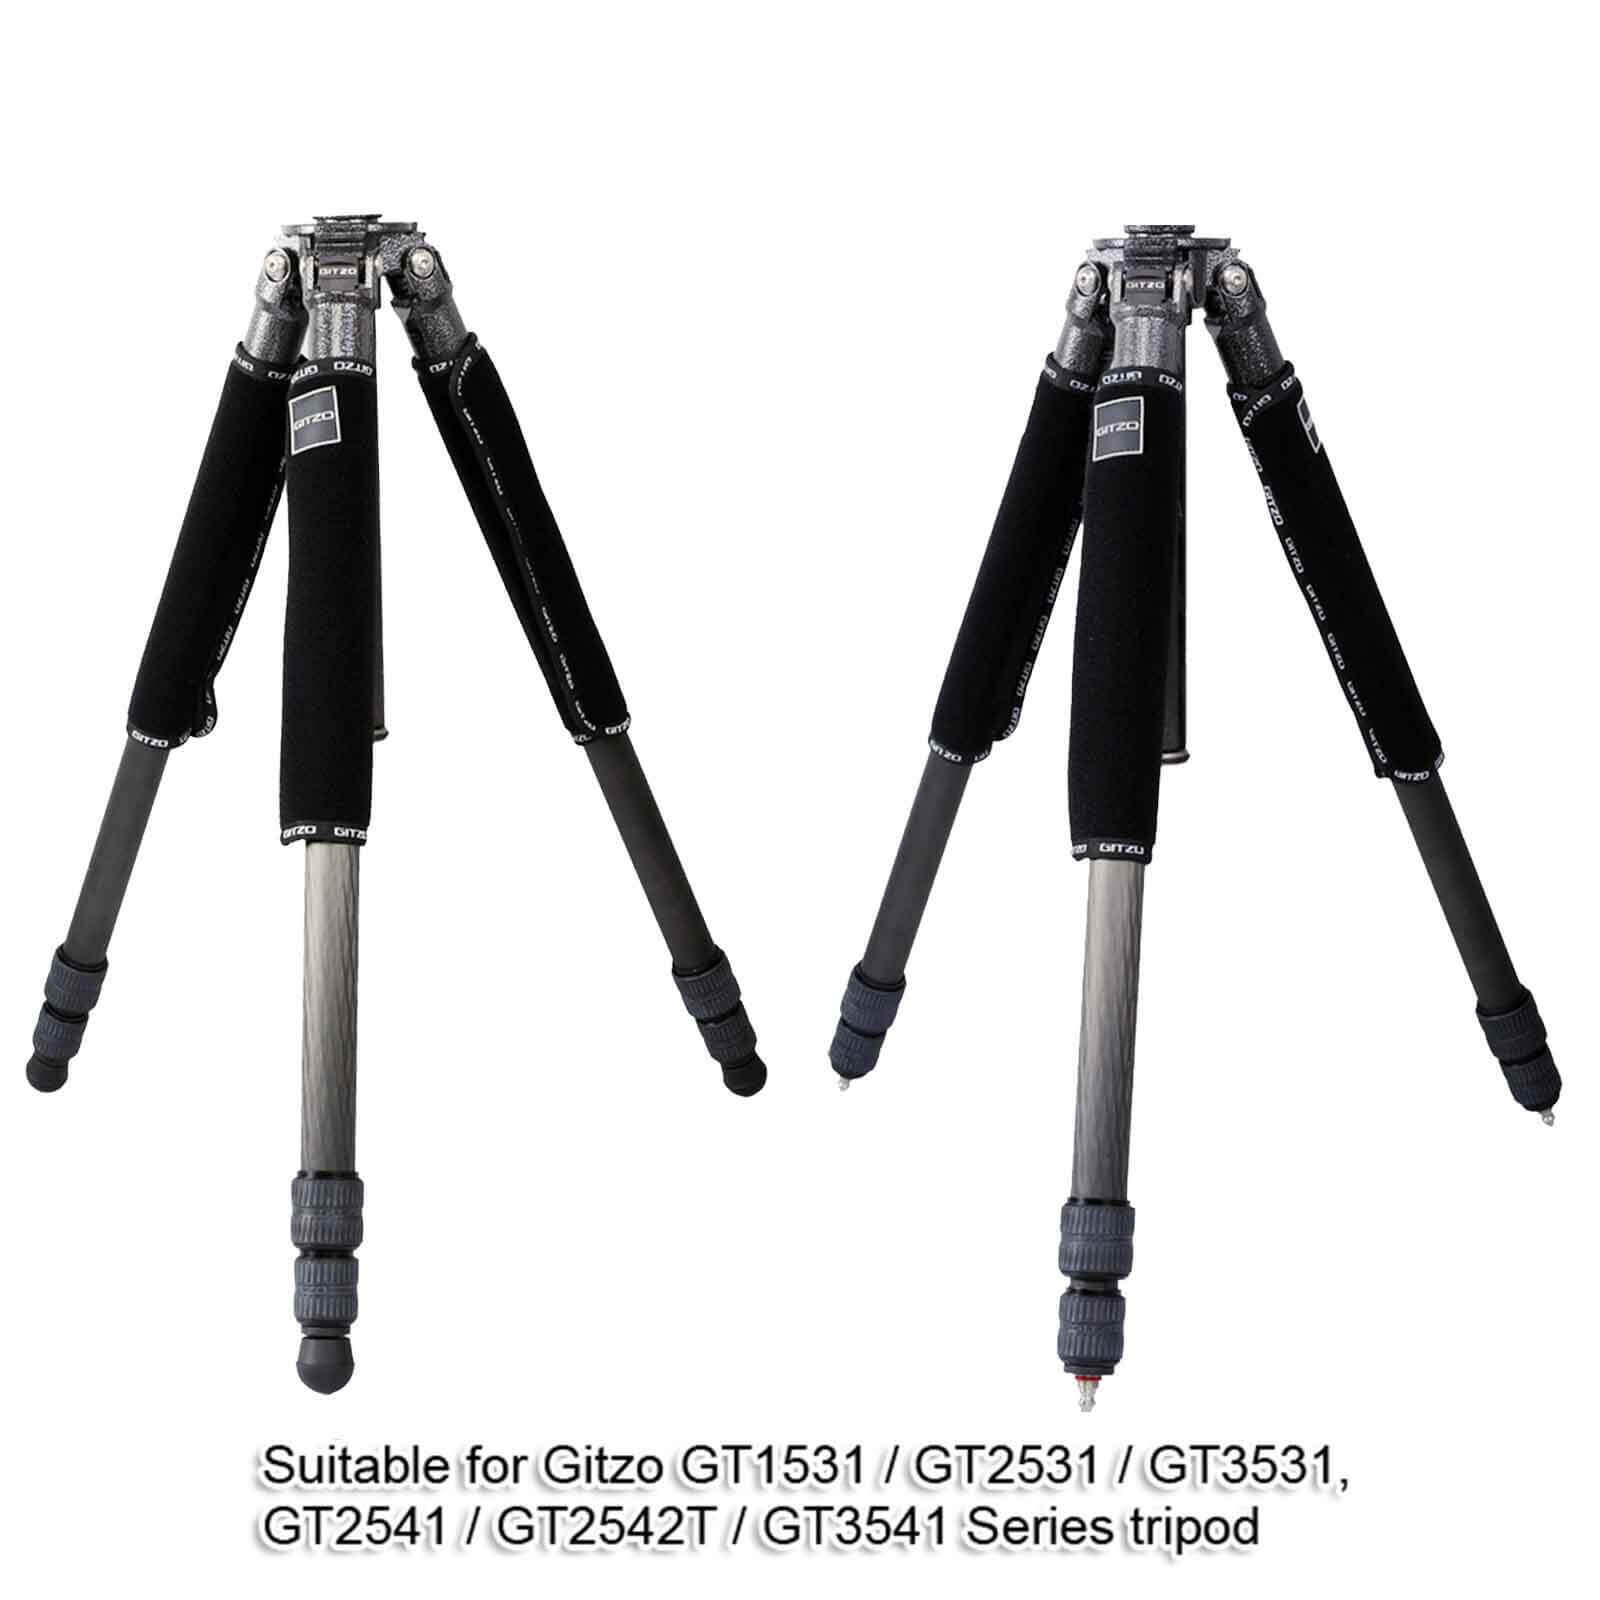 3/8 Male Threaded Stainless Steel Spike Foot with Anti-skidding Rubber Sleeve for Gitzo Monopod and GT1531 GT2531 GT3531 GT2541 GT2542T GT3541 Series Tripod 